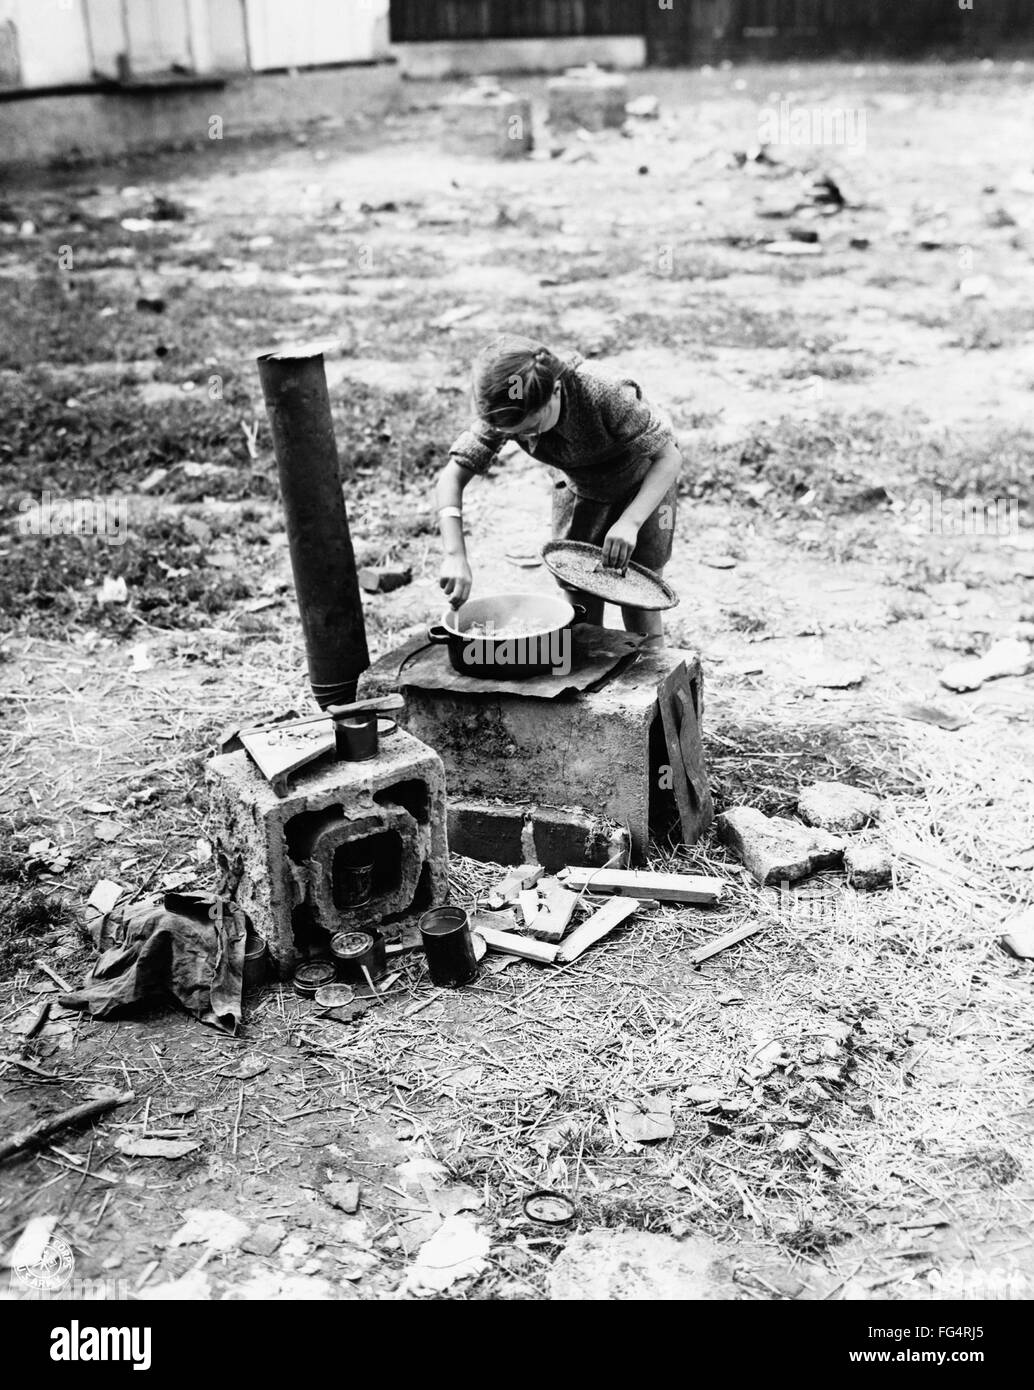 CONCENTRATION CAMP, 1945. /nA Ukrainian girl preparing a meal for her family on a makeshift stove in a concentration camp at Salzburg, Austria. Photograph, May 1945. Stock Photo